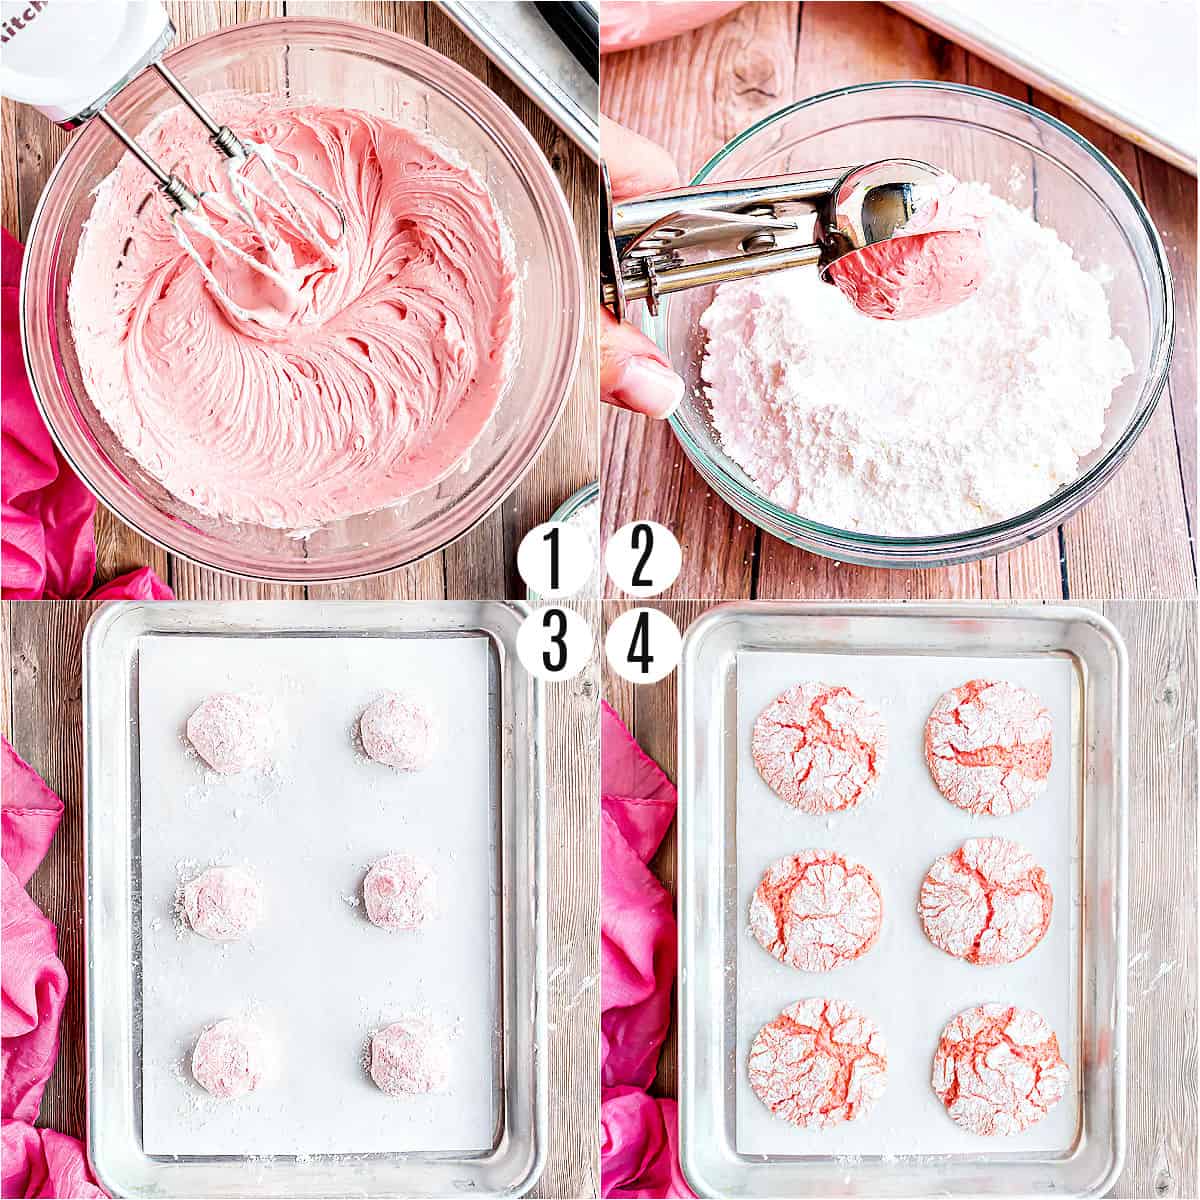 Step by step photos showing how to make cool whip cookies.